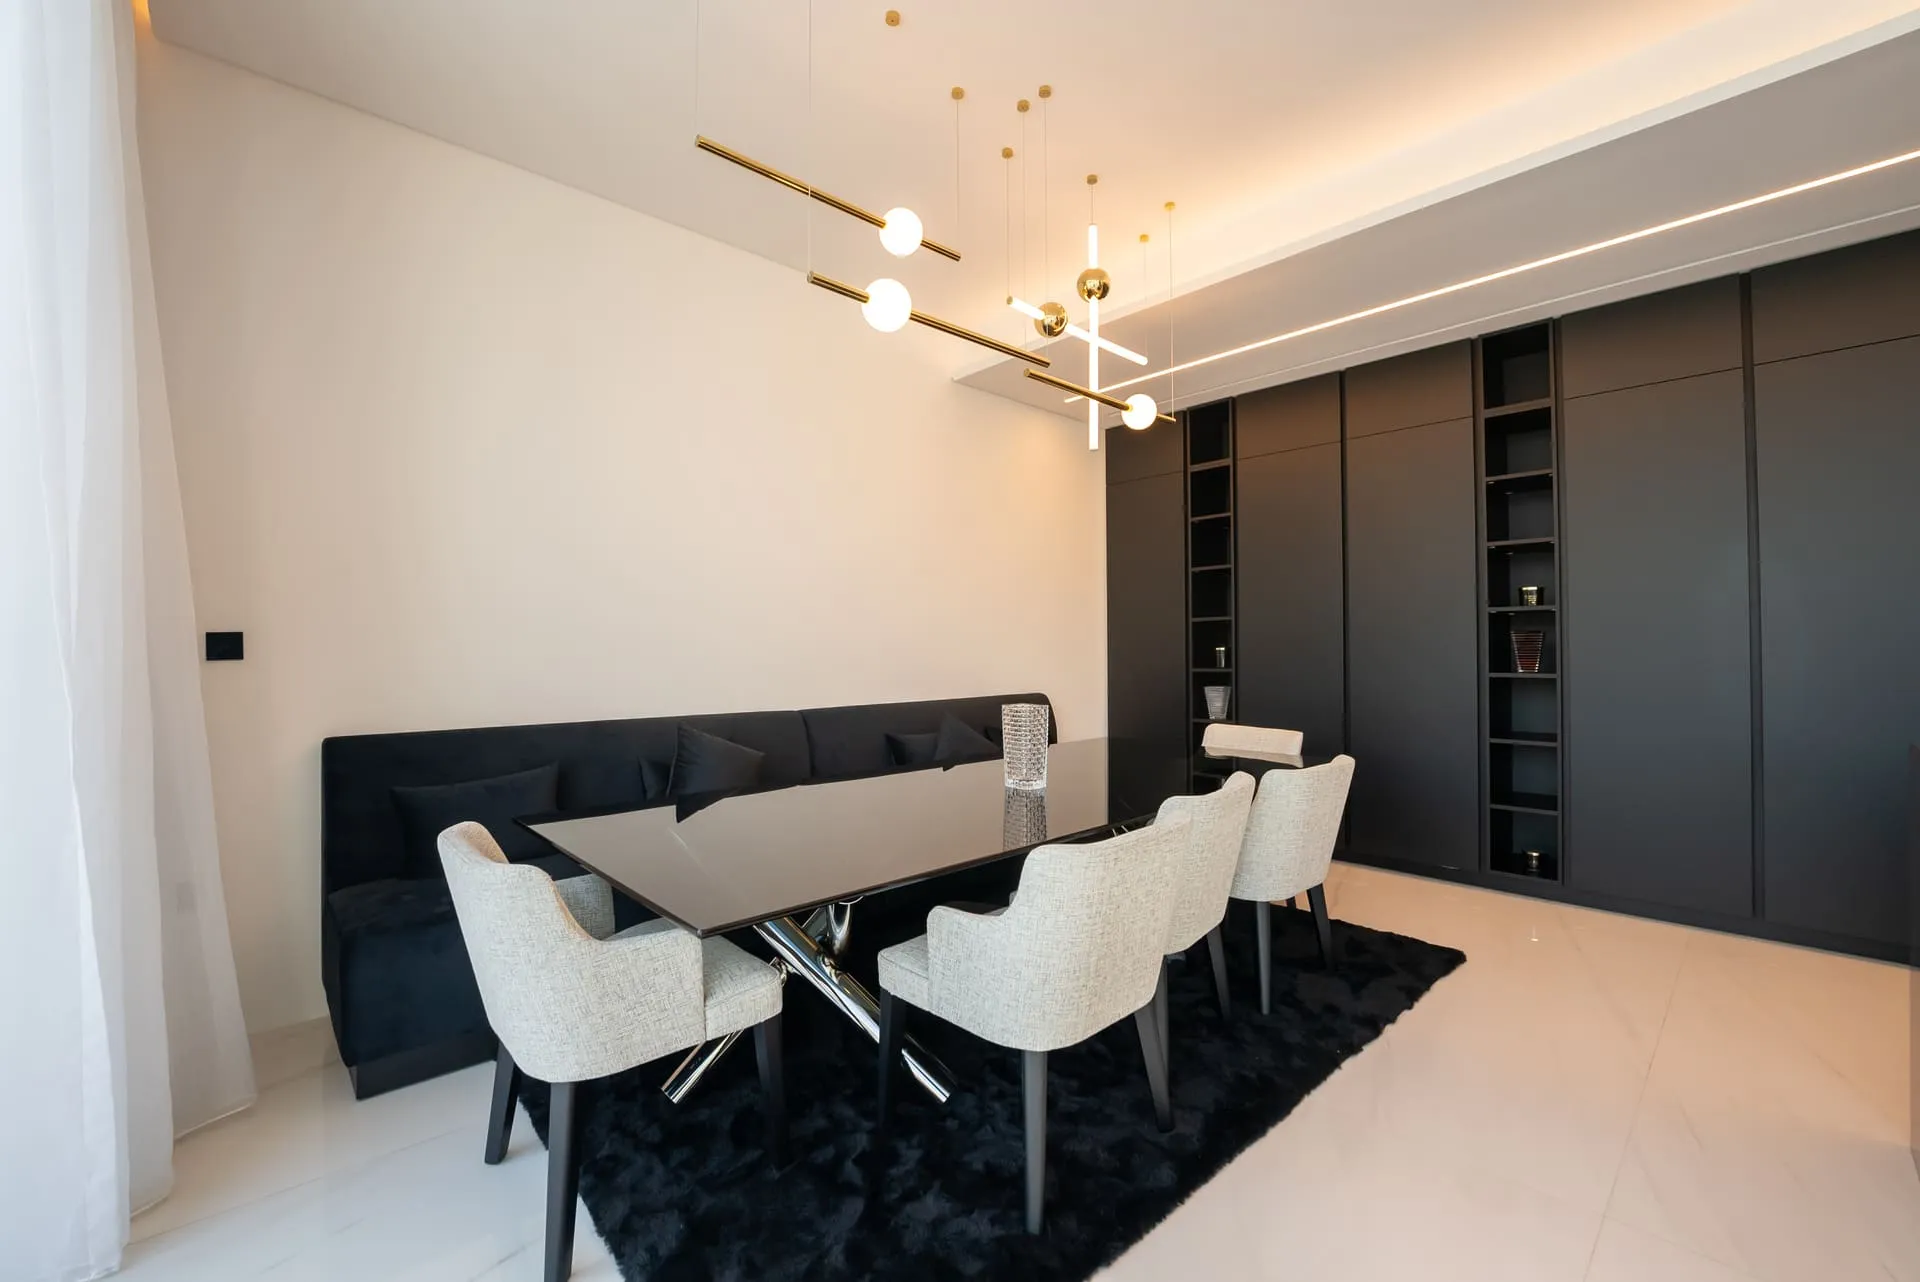 A stylish dining room with sleek black and white furniture, creating a modern and sophisticated ambiance.